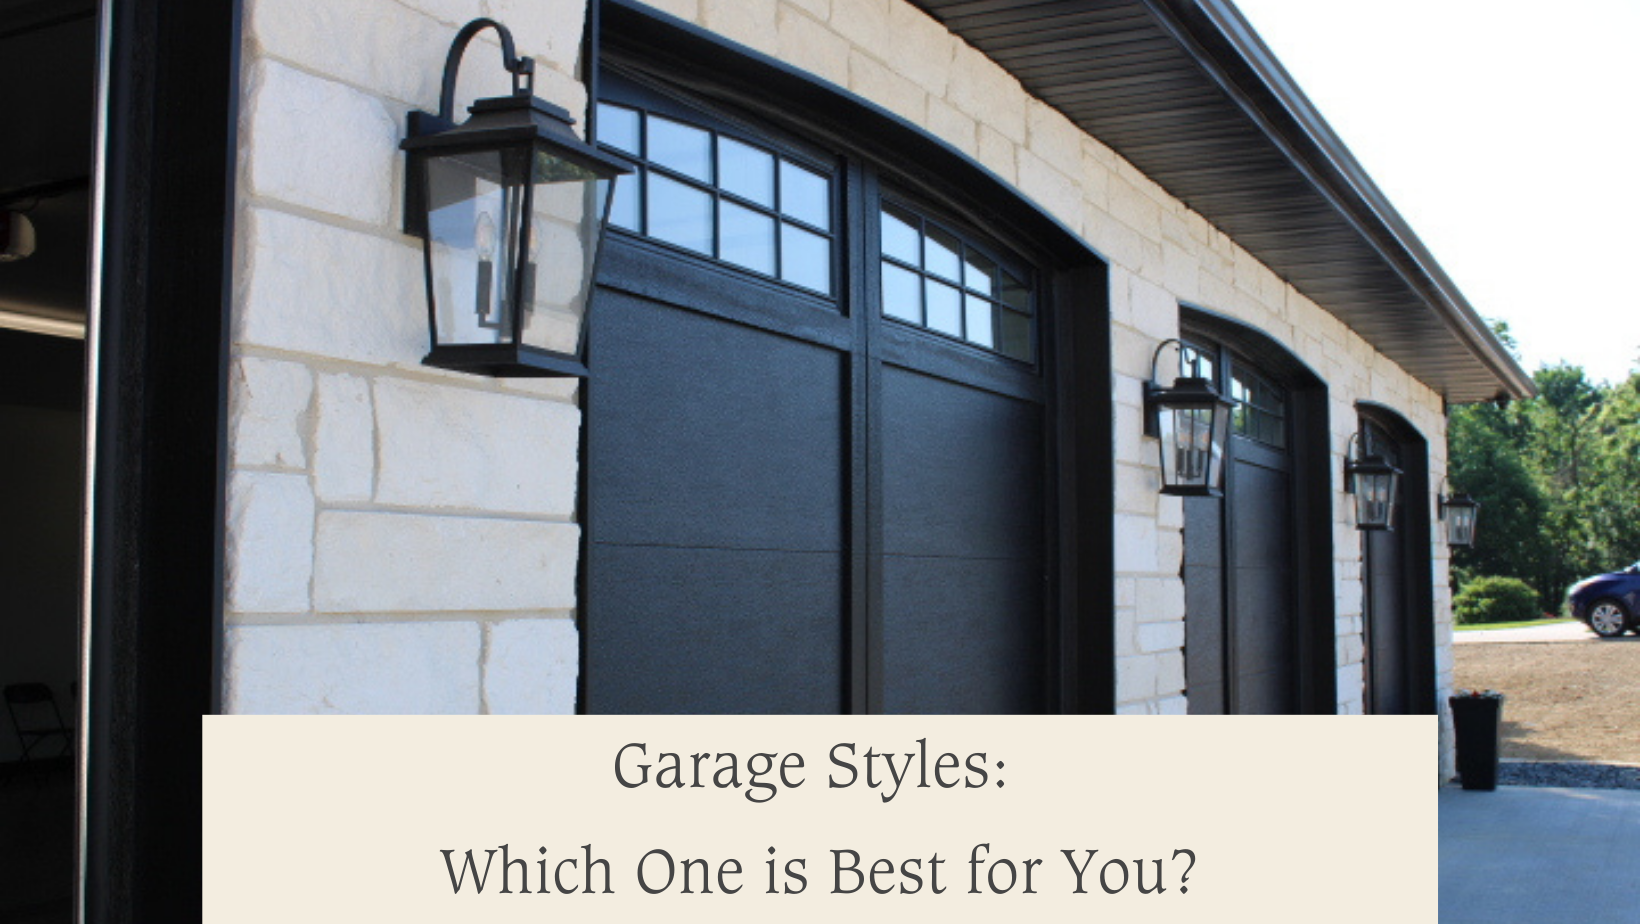 Garage Styles: Which One is Best for You?